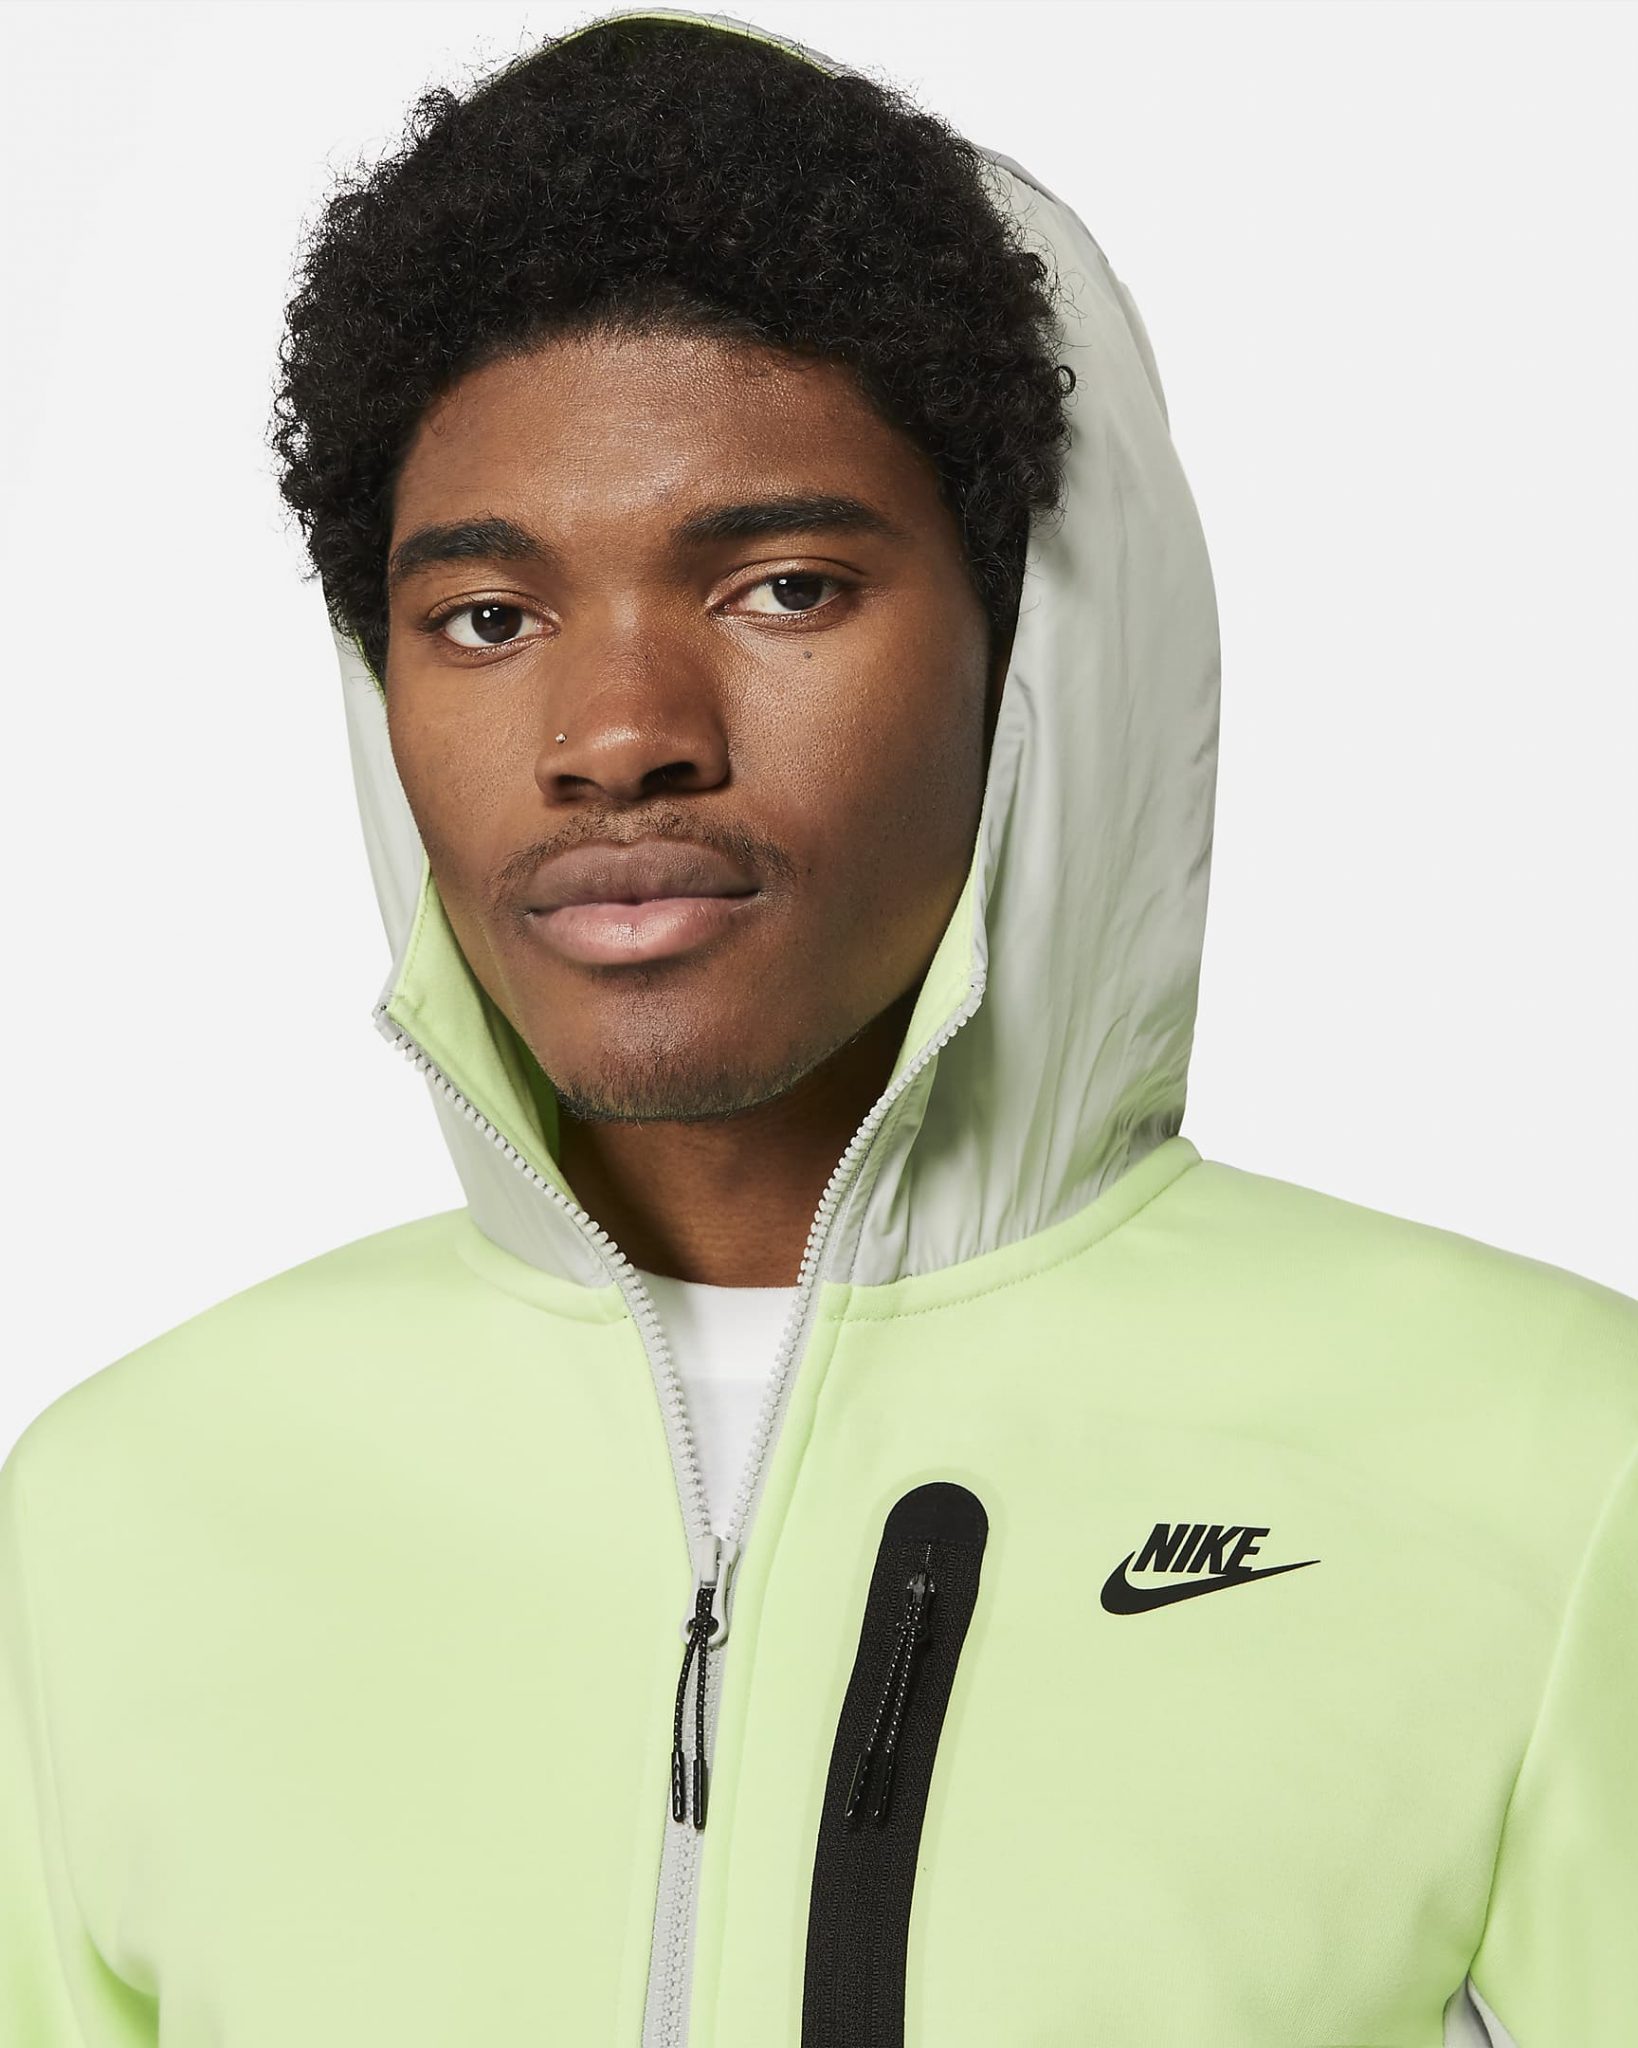 Nike Air Max 95 Neon Tech Fleece Hoodie and Pants Outfit